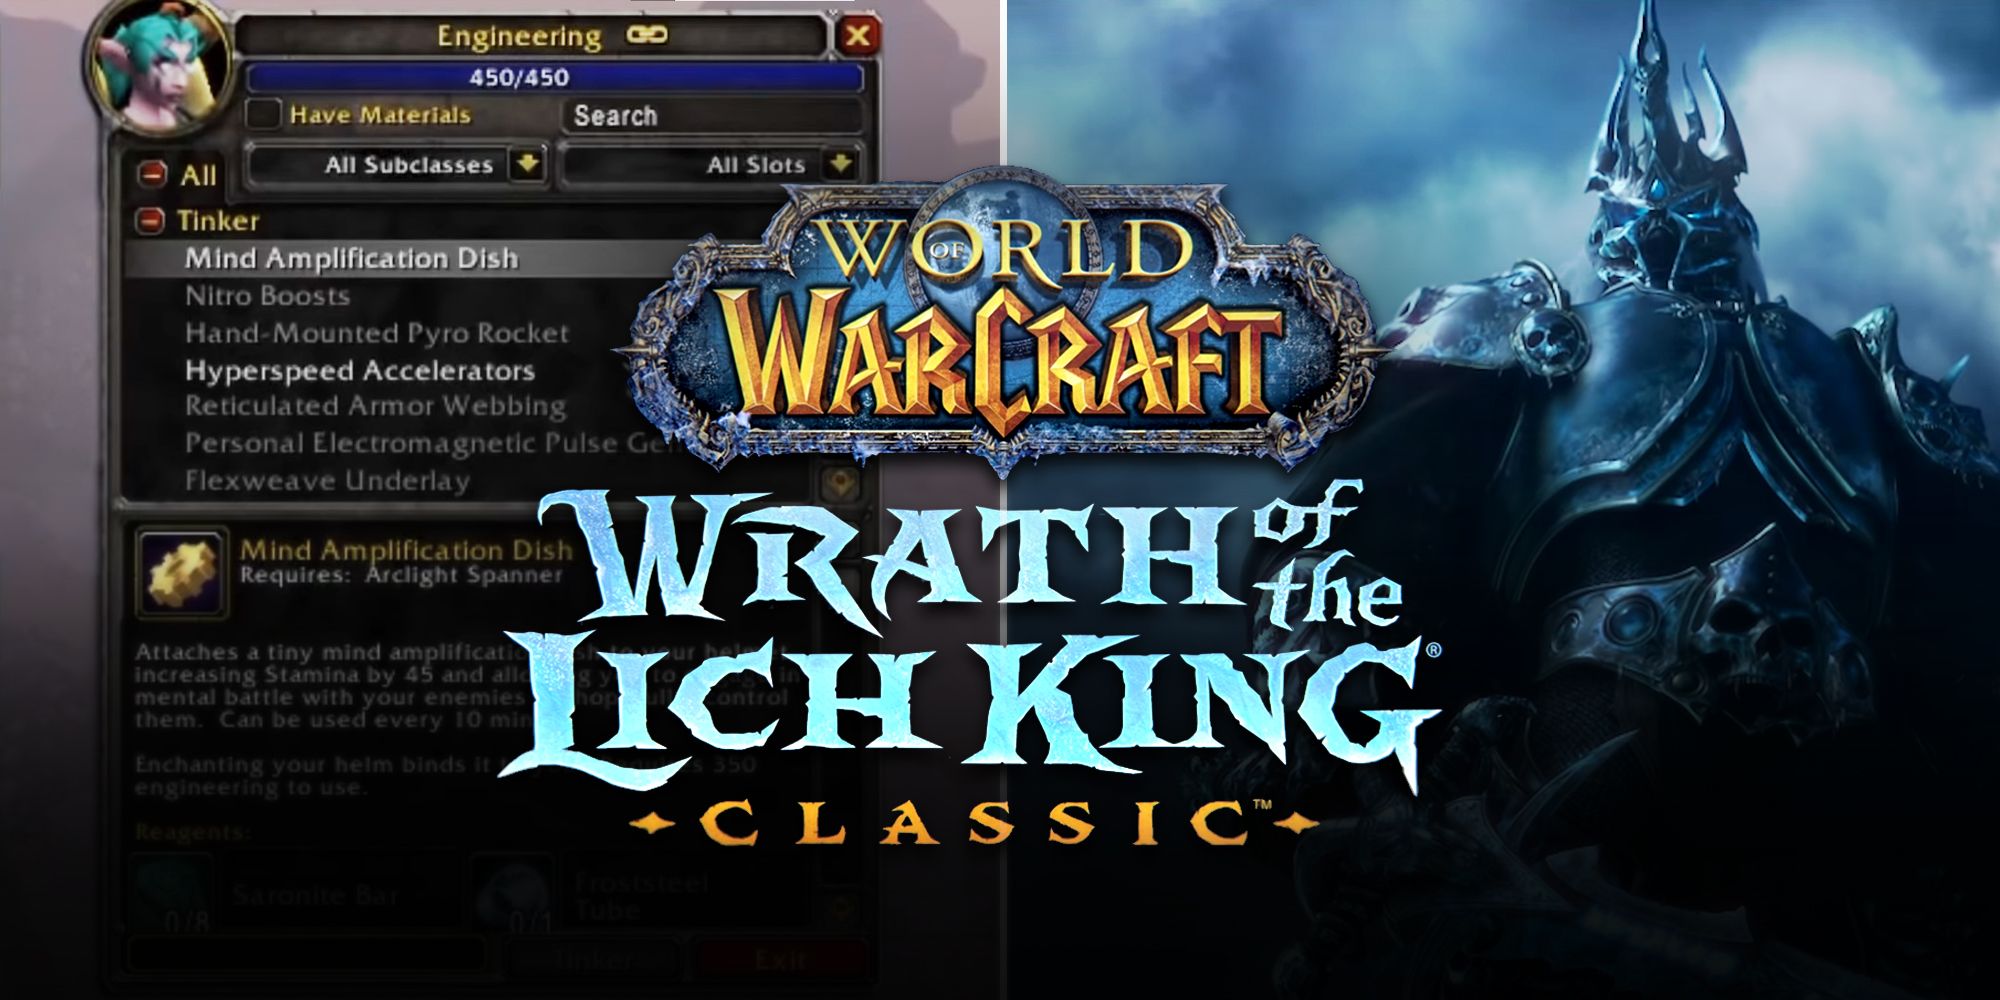 1-450 WotLK Engineering Guide: Quick & Efficient Leveling